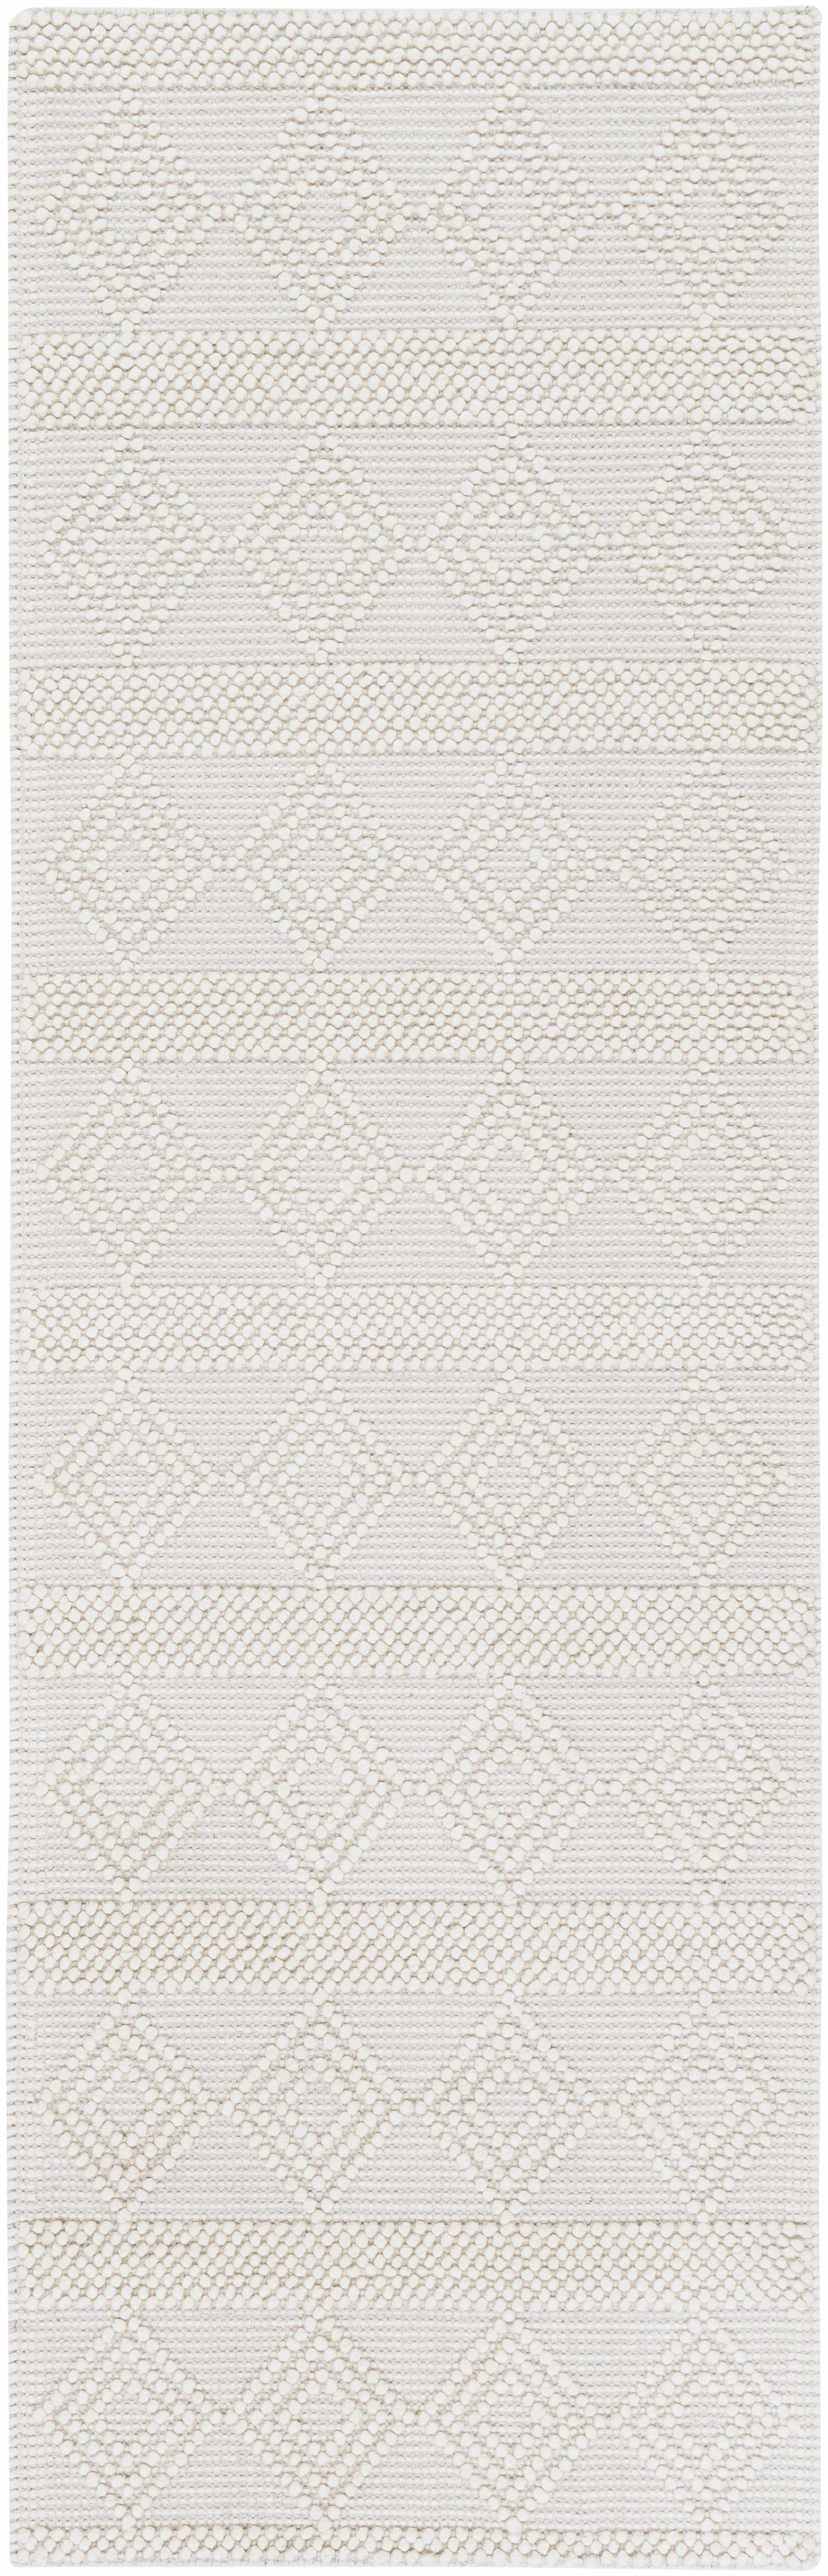 Boutique Rugs Rugs Bolinger Wool Area Rug